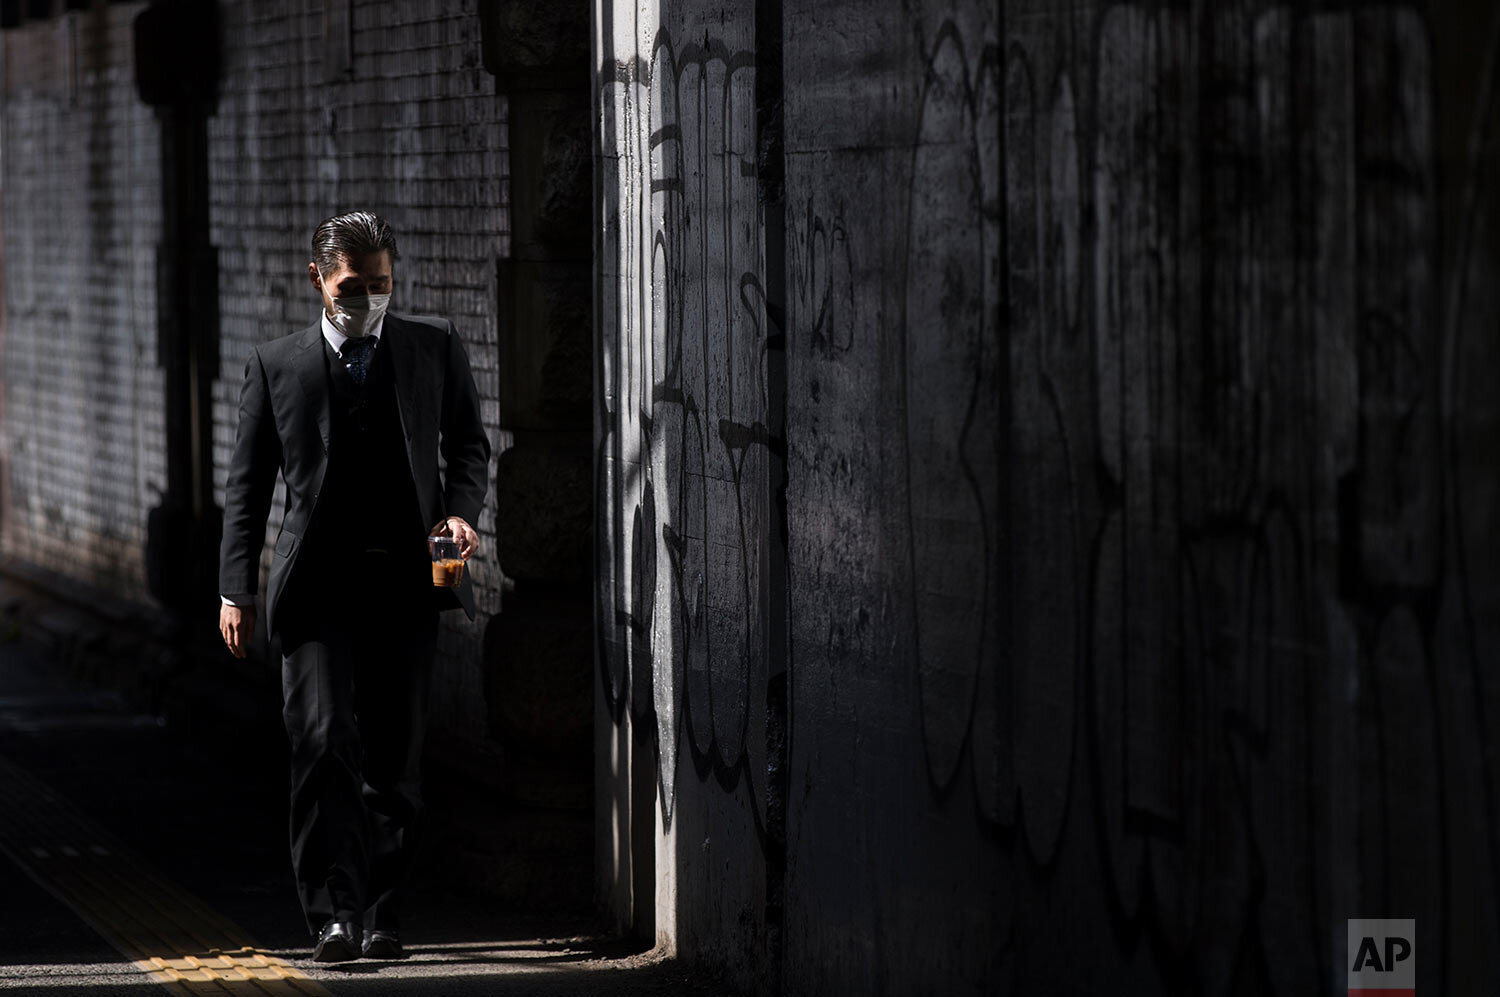  A man wearing a face mask walks on a street during lunchtime in Tokyo on Thursday, March 4, 2021. (AP Photo/Hiro Komae) 